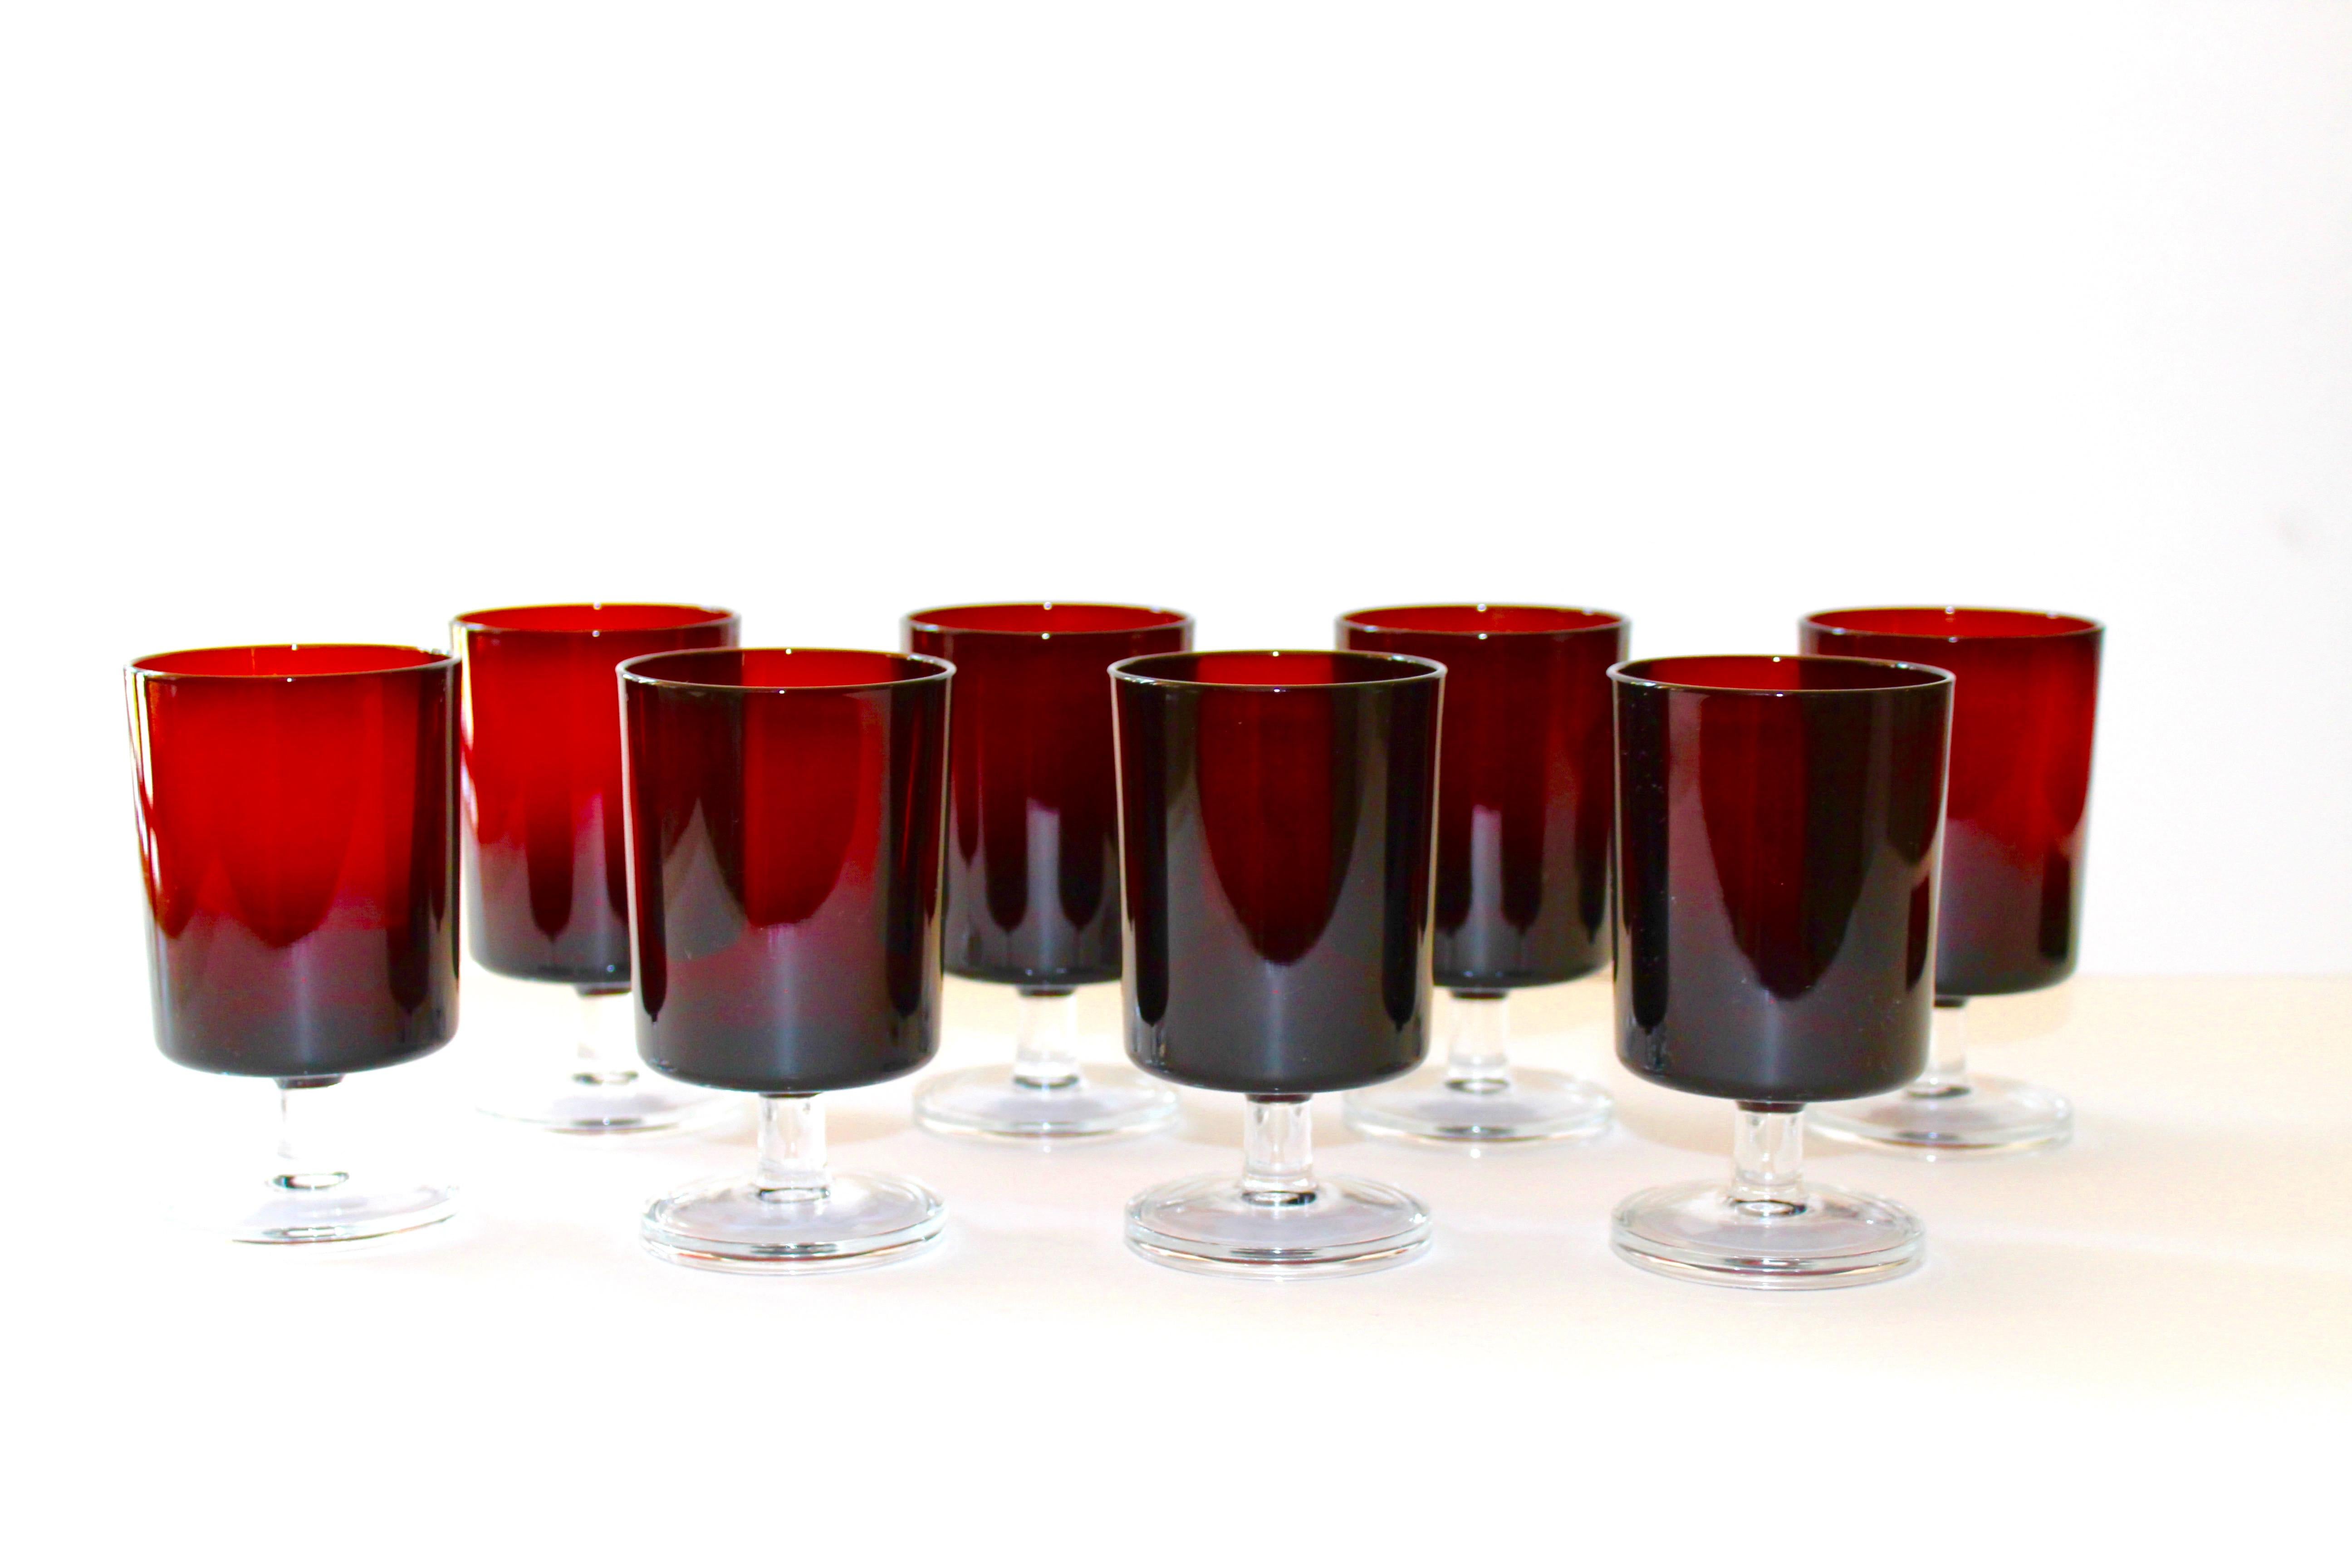 Set of 12 French vintage crystal wine goblets or liquor glasses in a gorgeous gemstone garnet red with clear glass stems. Glasses have Minimalist design with cylinder forms. Stamped 